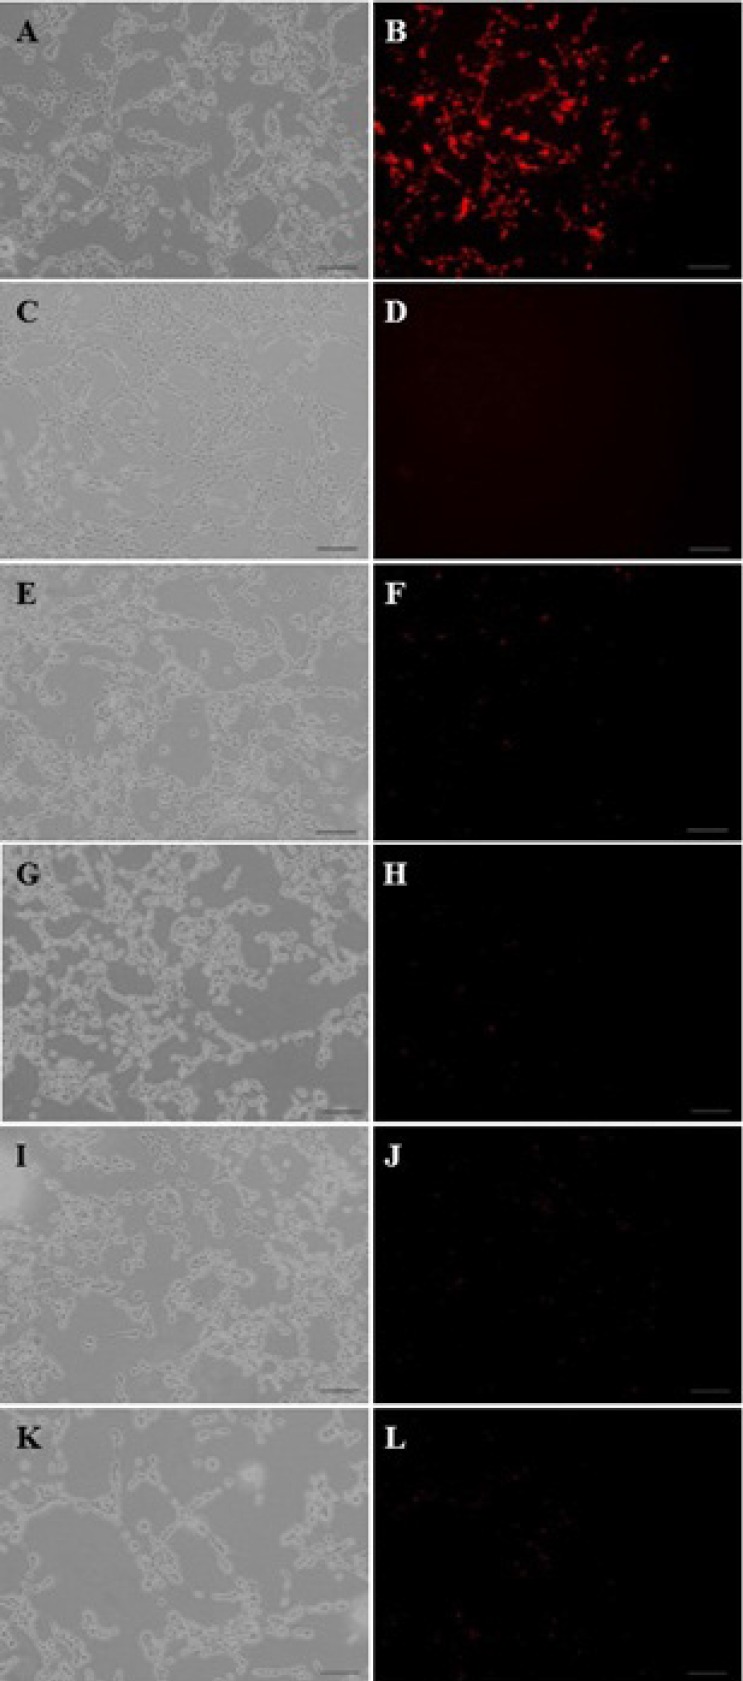 The fluorescent images of PAMAM–PEG–SRL/ EMA-labeled DNA cellular internalization. Internalization mechanism of nanoparticles by C6 glioma cells. Concentration of PAMAM of all samples was adjusted to 1μM (250 μg/m). PAMAM–PEG–SRL/EMA-labeled DNA without any inhibitor (as control) (A, B). Cells were incubated with different endocytosis inhibitors including: lactoferrin (E, F), phenylarsine oxide (G, H), filipin complex (I, J), colchicine (K, L), and at 4o C (C, D); for 30 min. Red: EMA-labeled DNA. Bar: 50μm